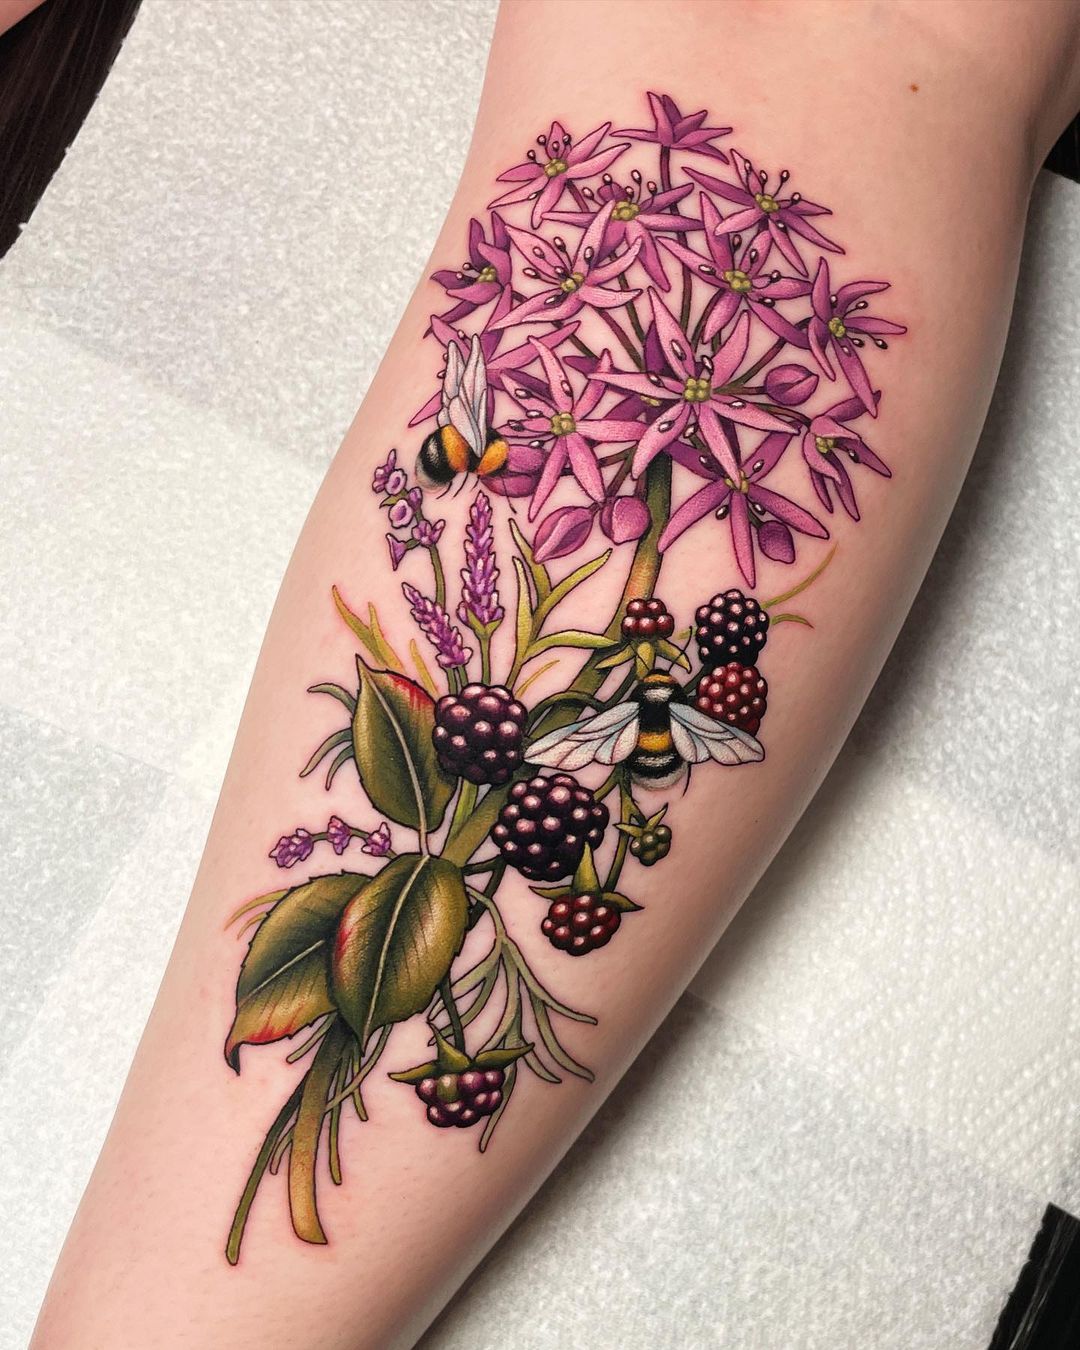 Dragon fruit tattoo located on the forearm, watercolor